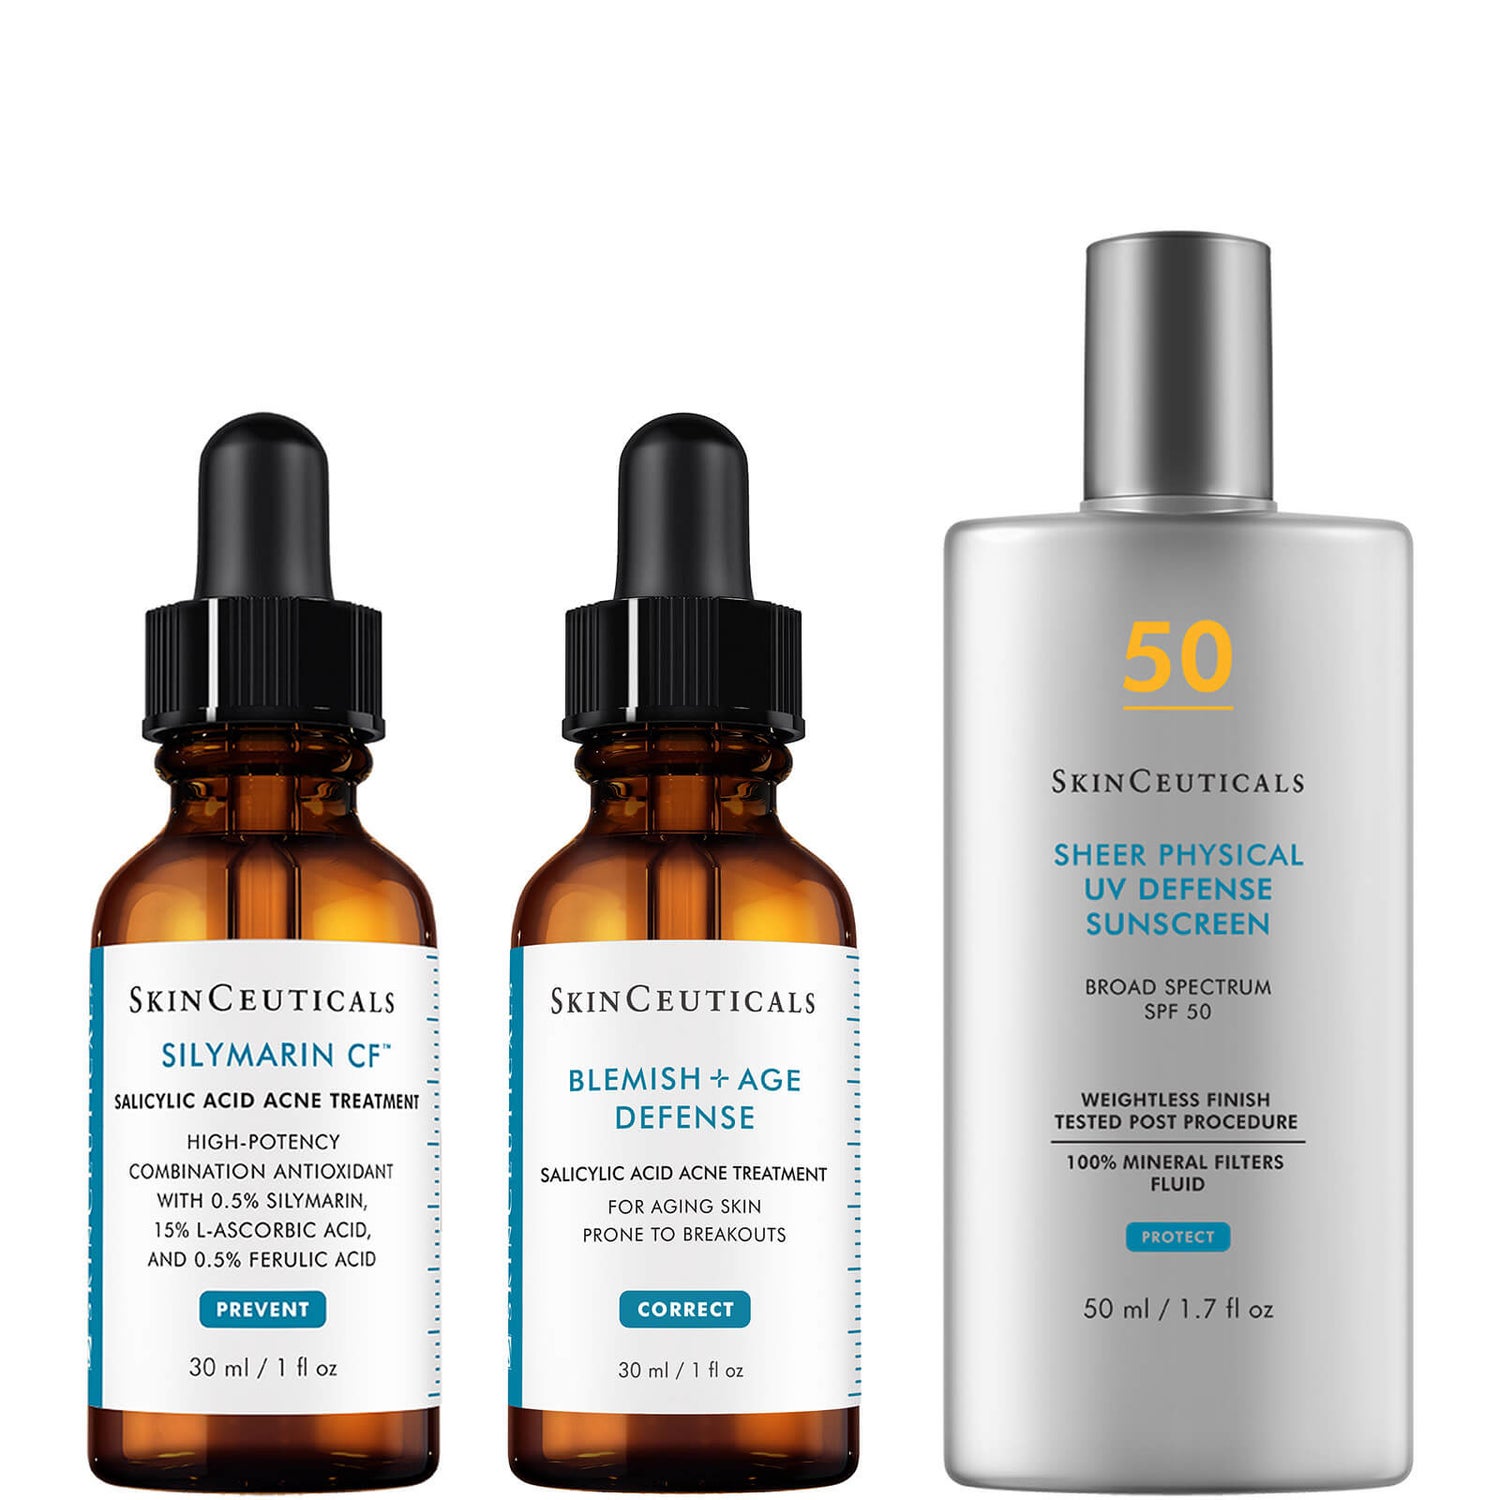 SkinCeuticals Vitamin C and Mineral Sunscreen Kit for Acne Prone Skin (Worth $301.00)